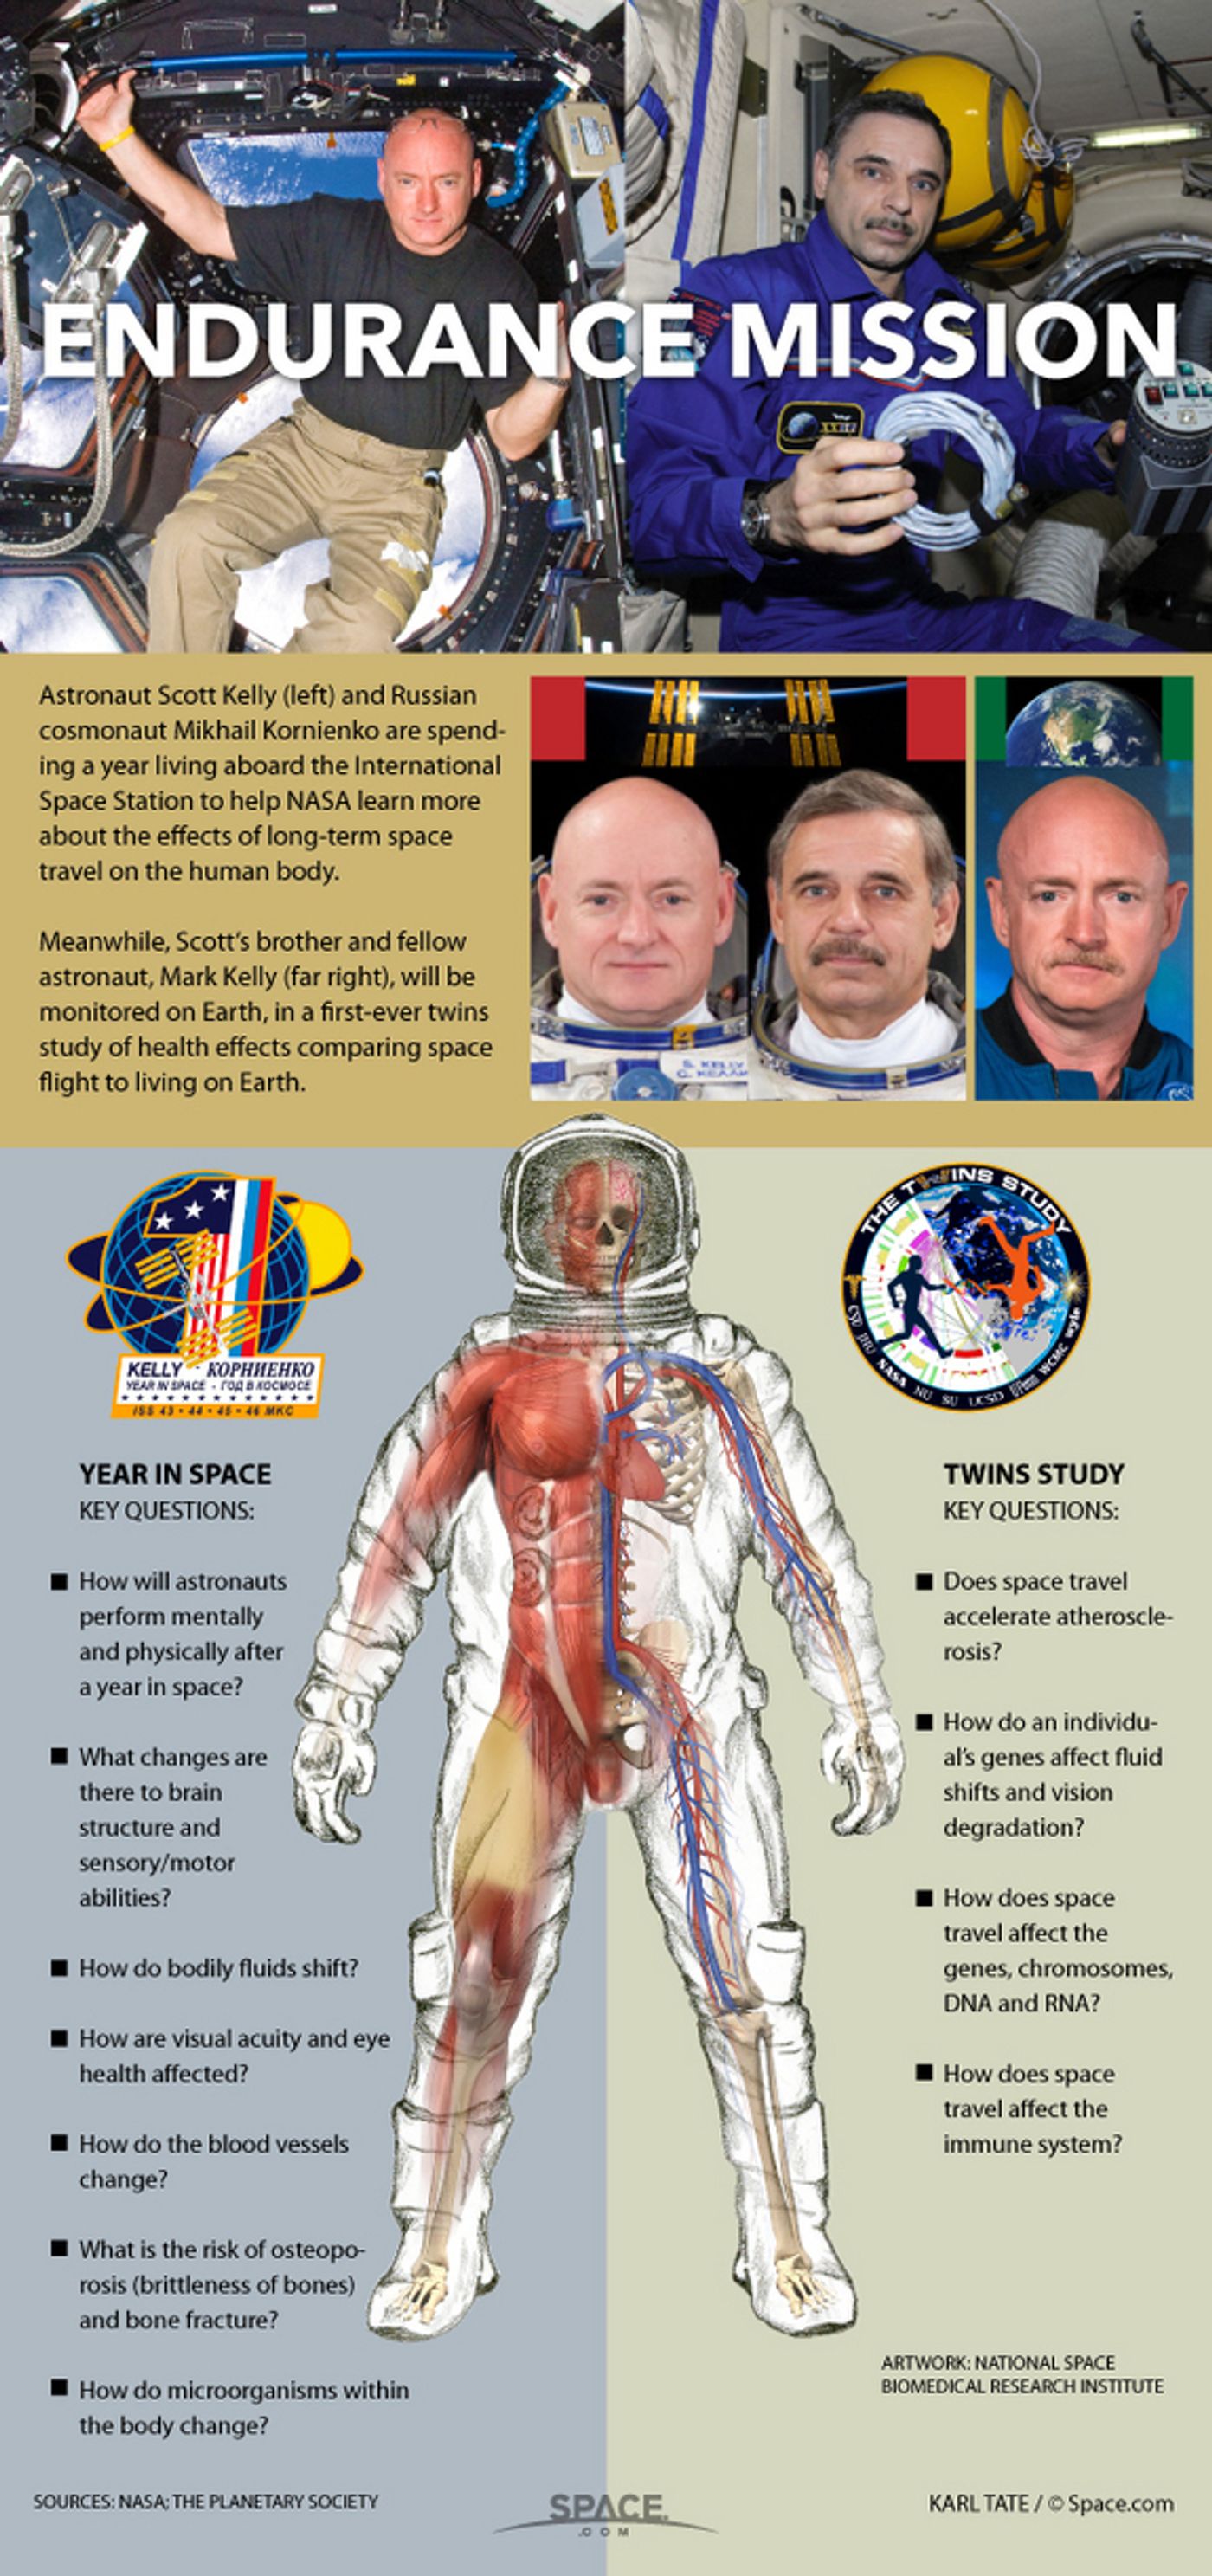 Astronaut Scott Kelly will be spending a year in space at the ISS to study the effects of long-duration space missions on the human body.  Meanwhile, his identical twin, Mark Kelley will be here on earth.